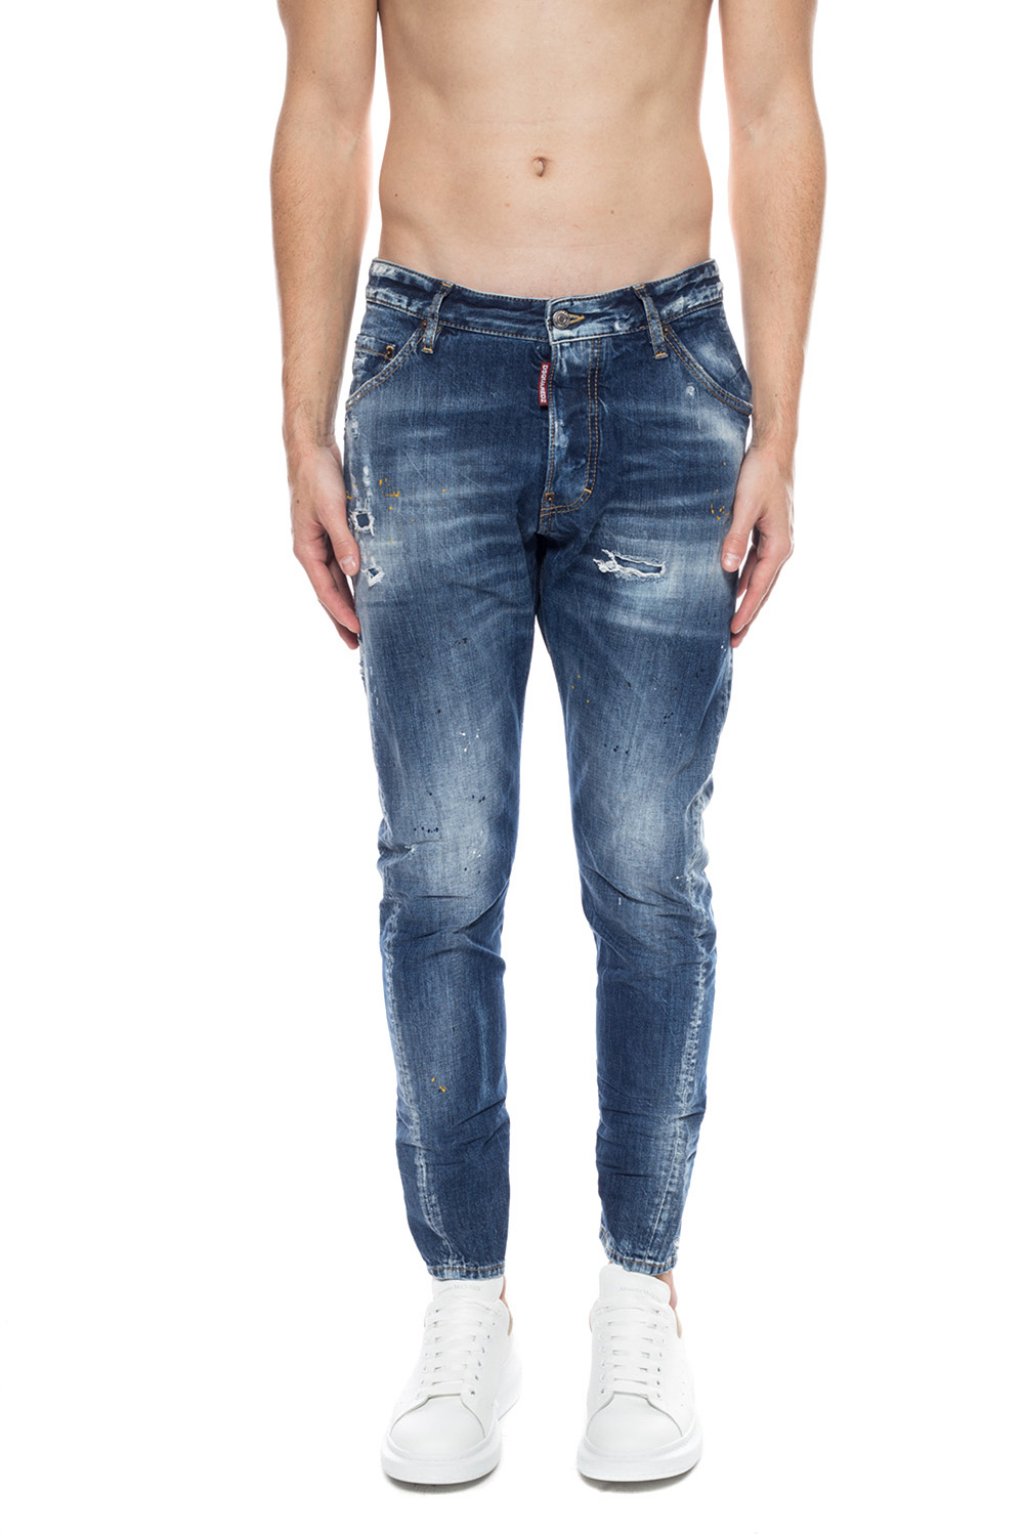 Dsquared2 Classic Kenny Jeans Poland, SAVE 42% - mpgc.net